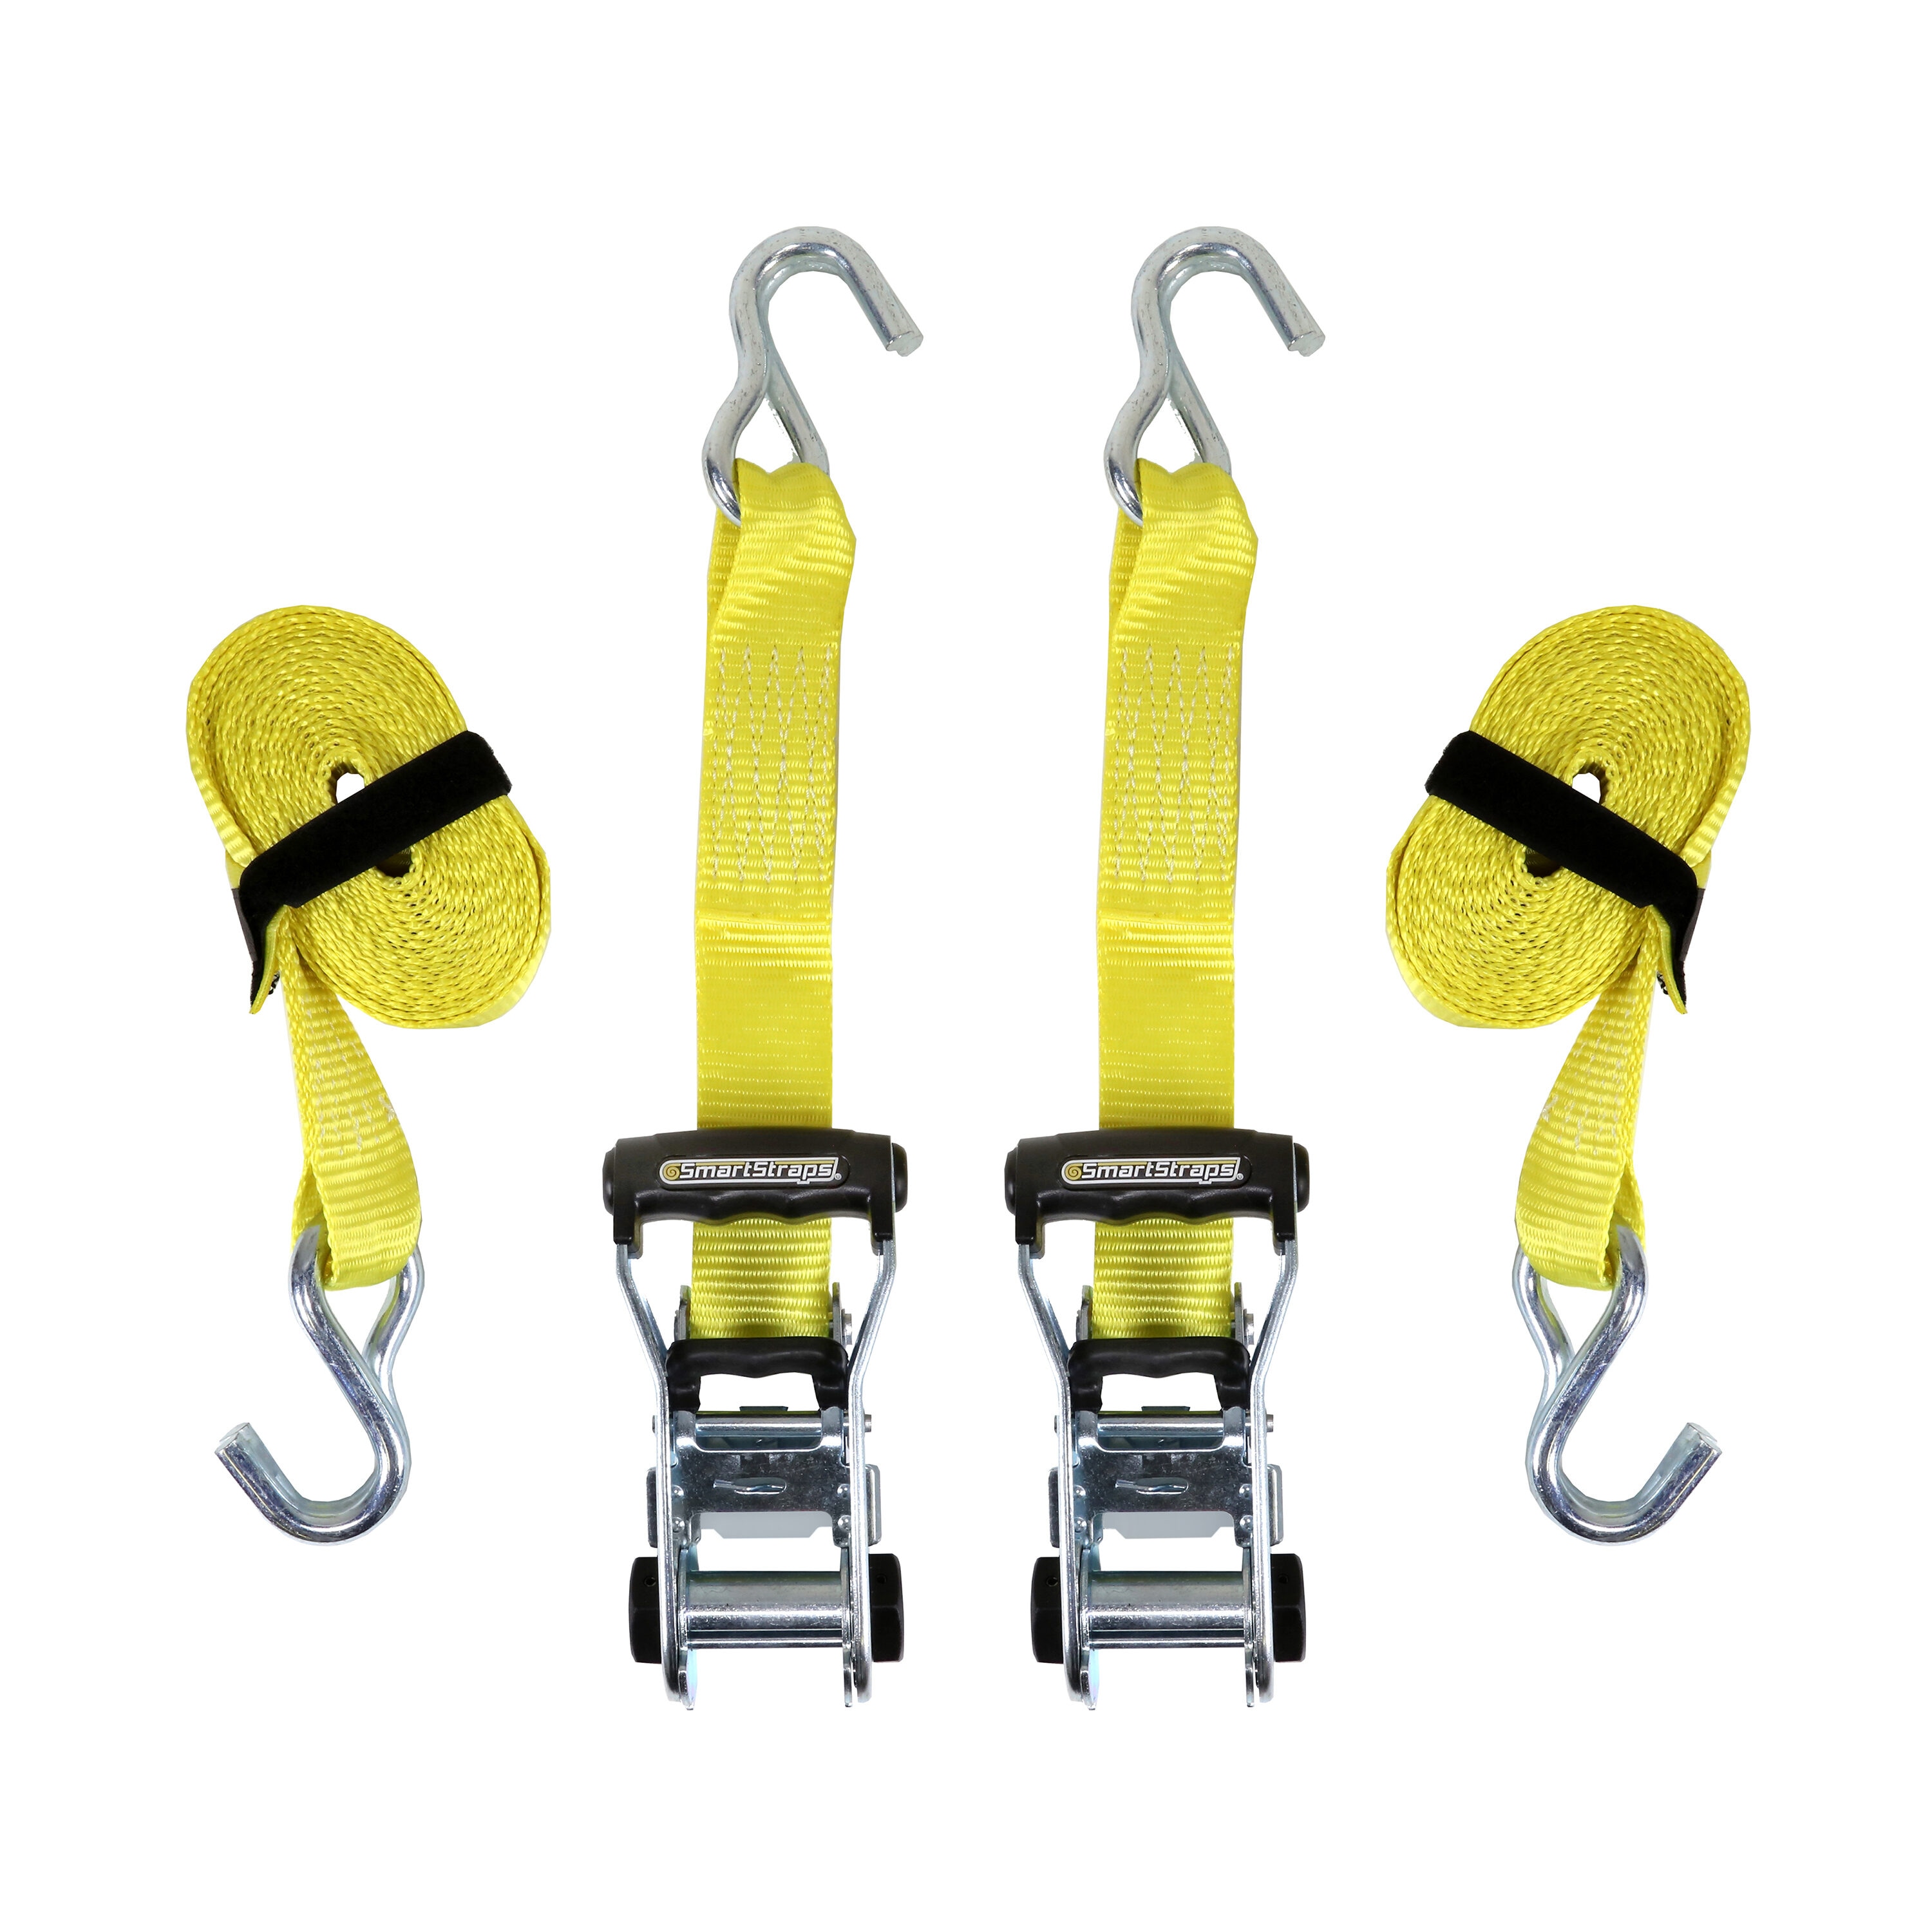  D-Ring Velcrdo Adjustable Tie Down Straps 6 Pack : Tools & Home  Improvement